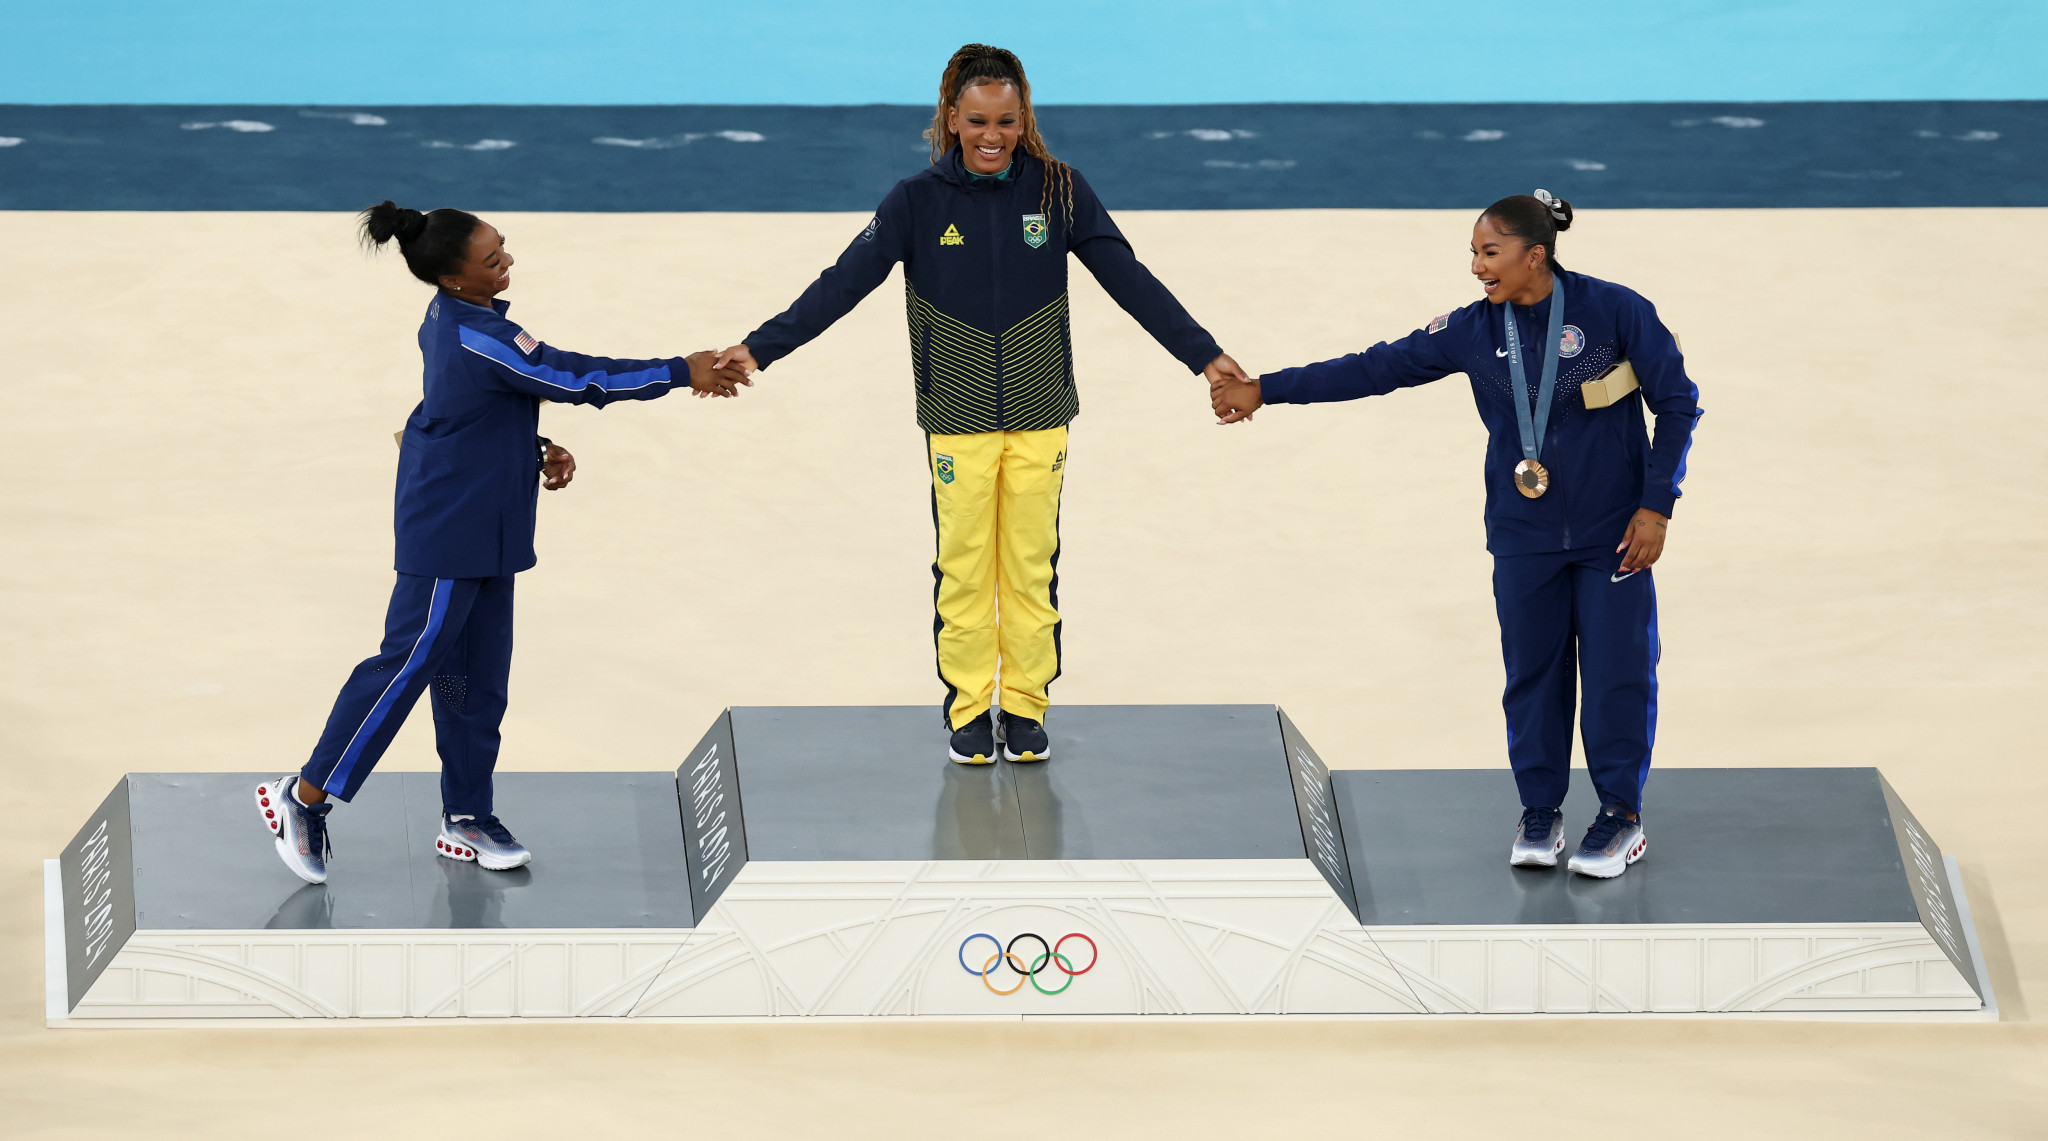 Gold medalist Rebeca Andrade of Brazil holds hands with Simone Biles and Jordan Chiles of Team United States on the podium at the Artistic Gymnastics Women's Floor Exercise Medal Ceremony at the Paris 2024 Olympic Games. GETTY IMAGES